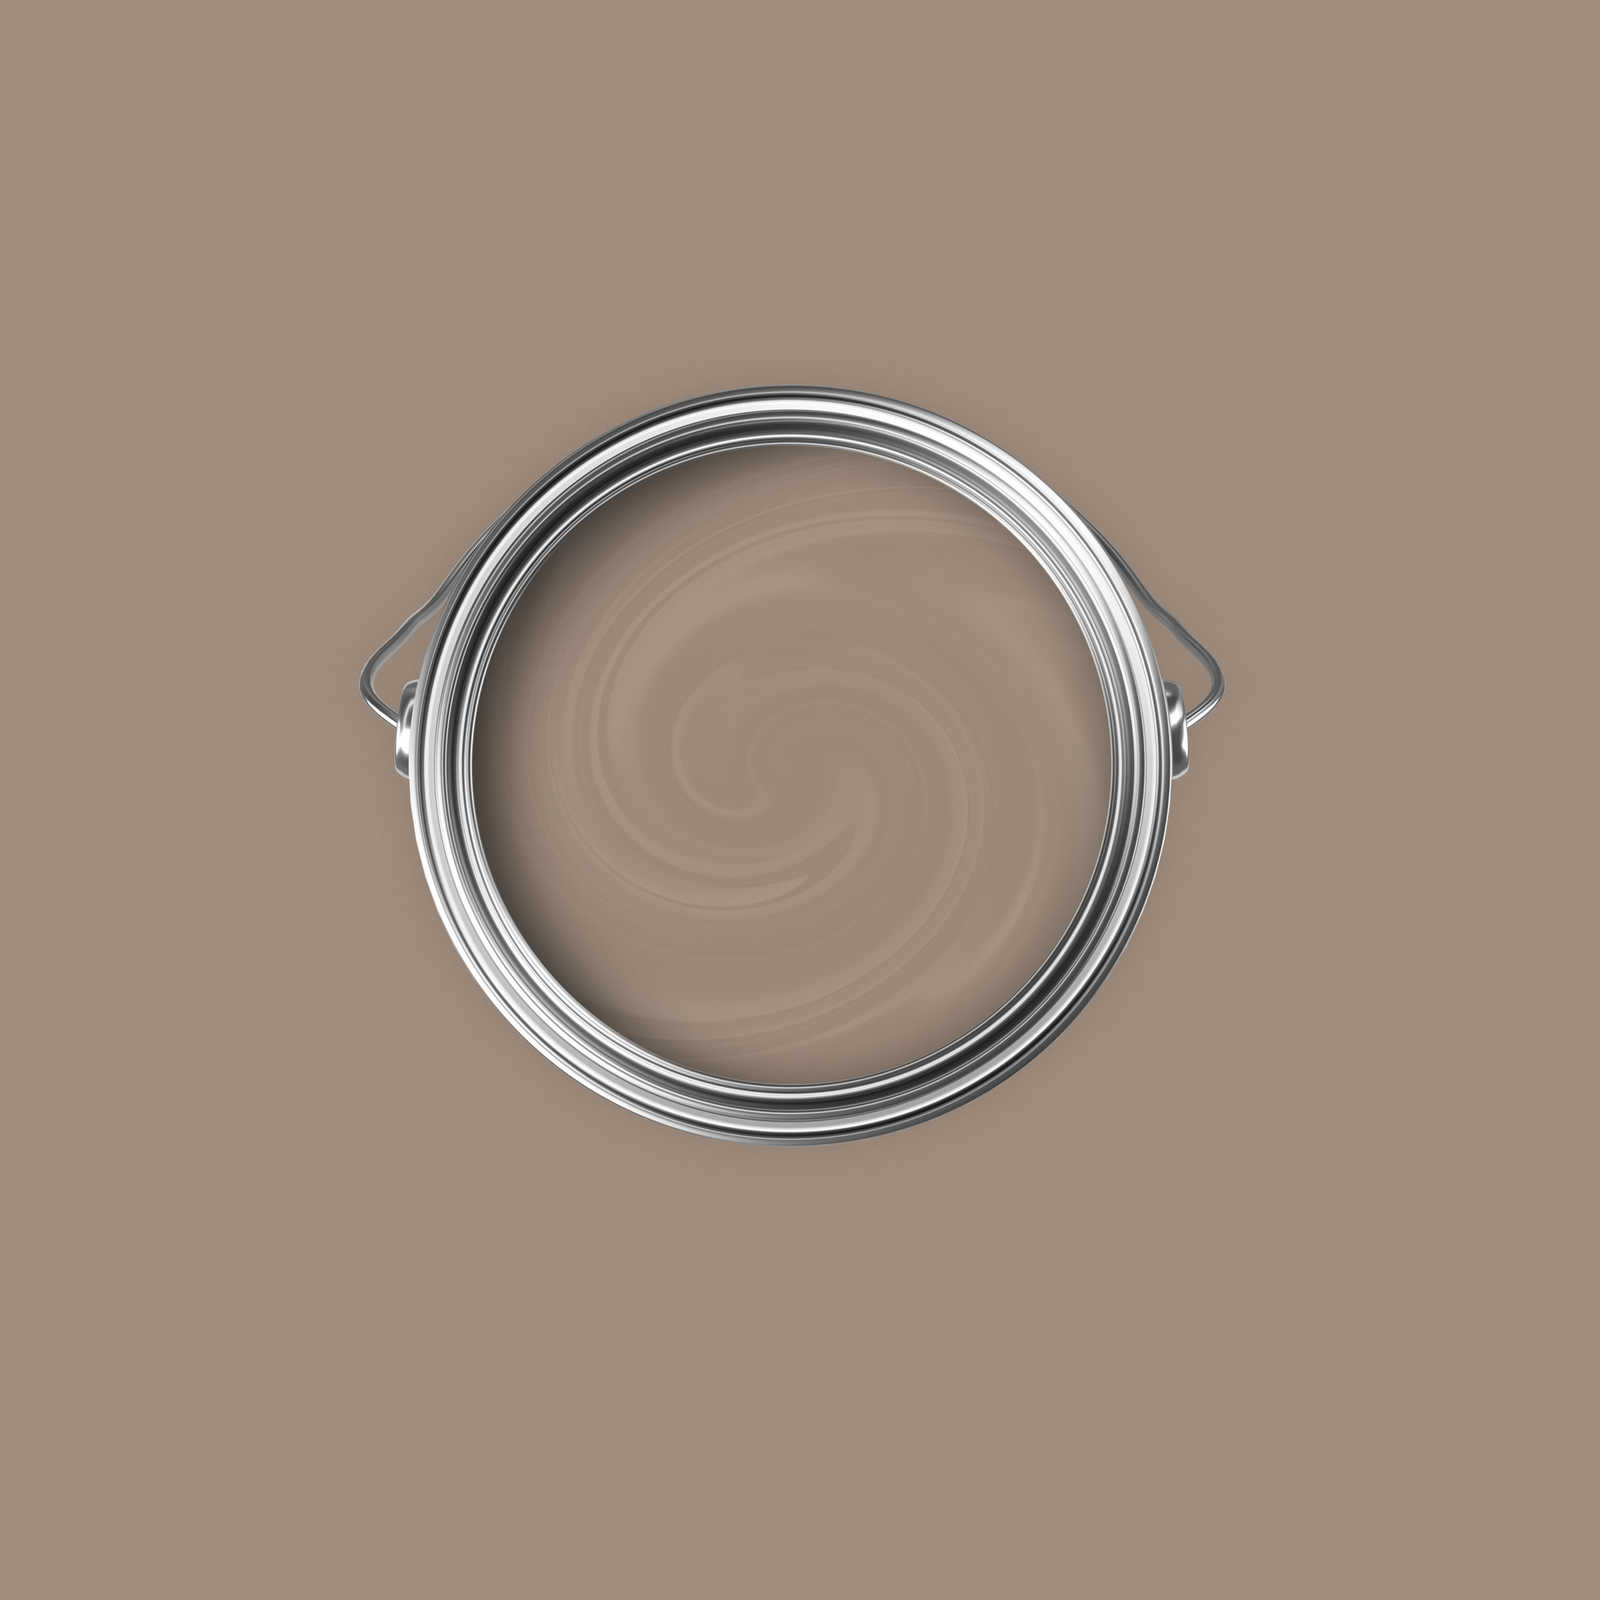             Premium Wall Paint Down-to-earth Taupe »Talented calm taupe« NW702 – 2.5 litre
        